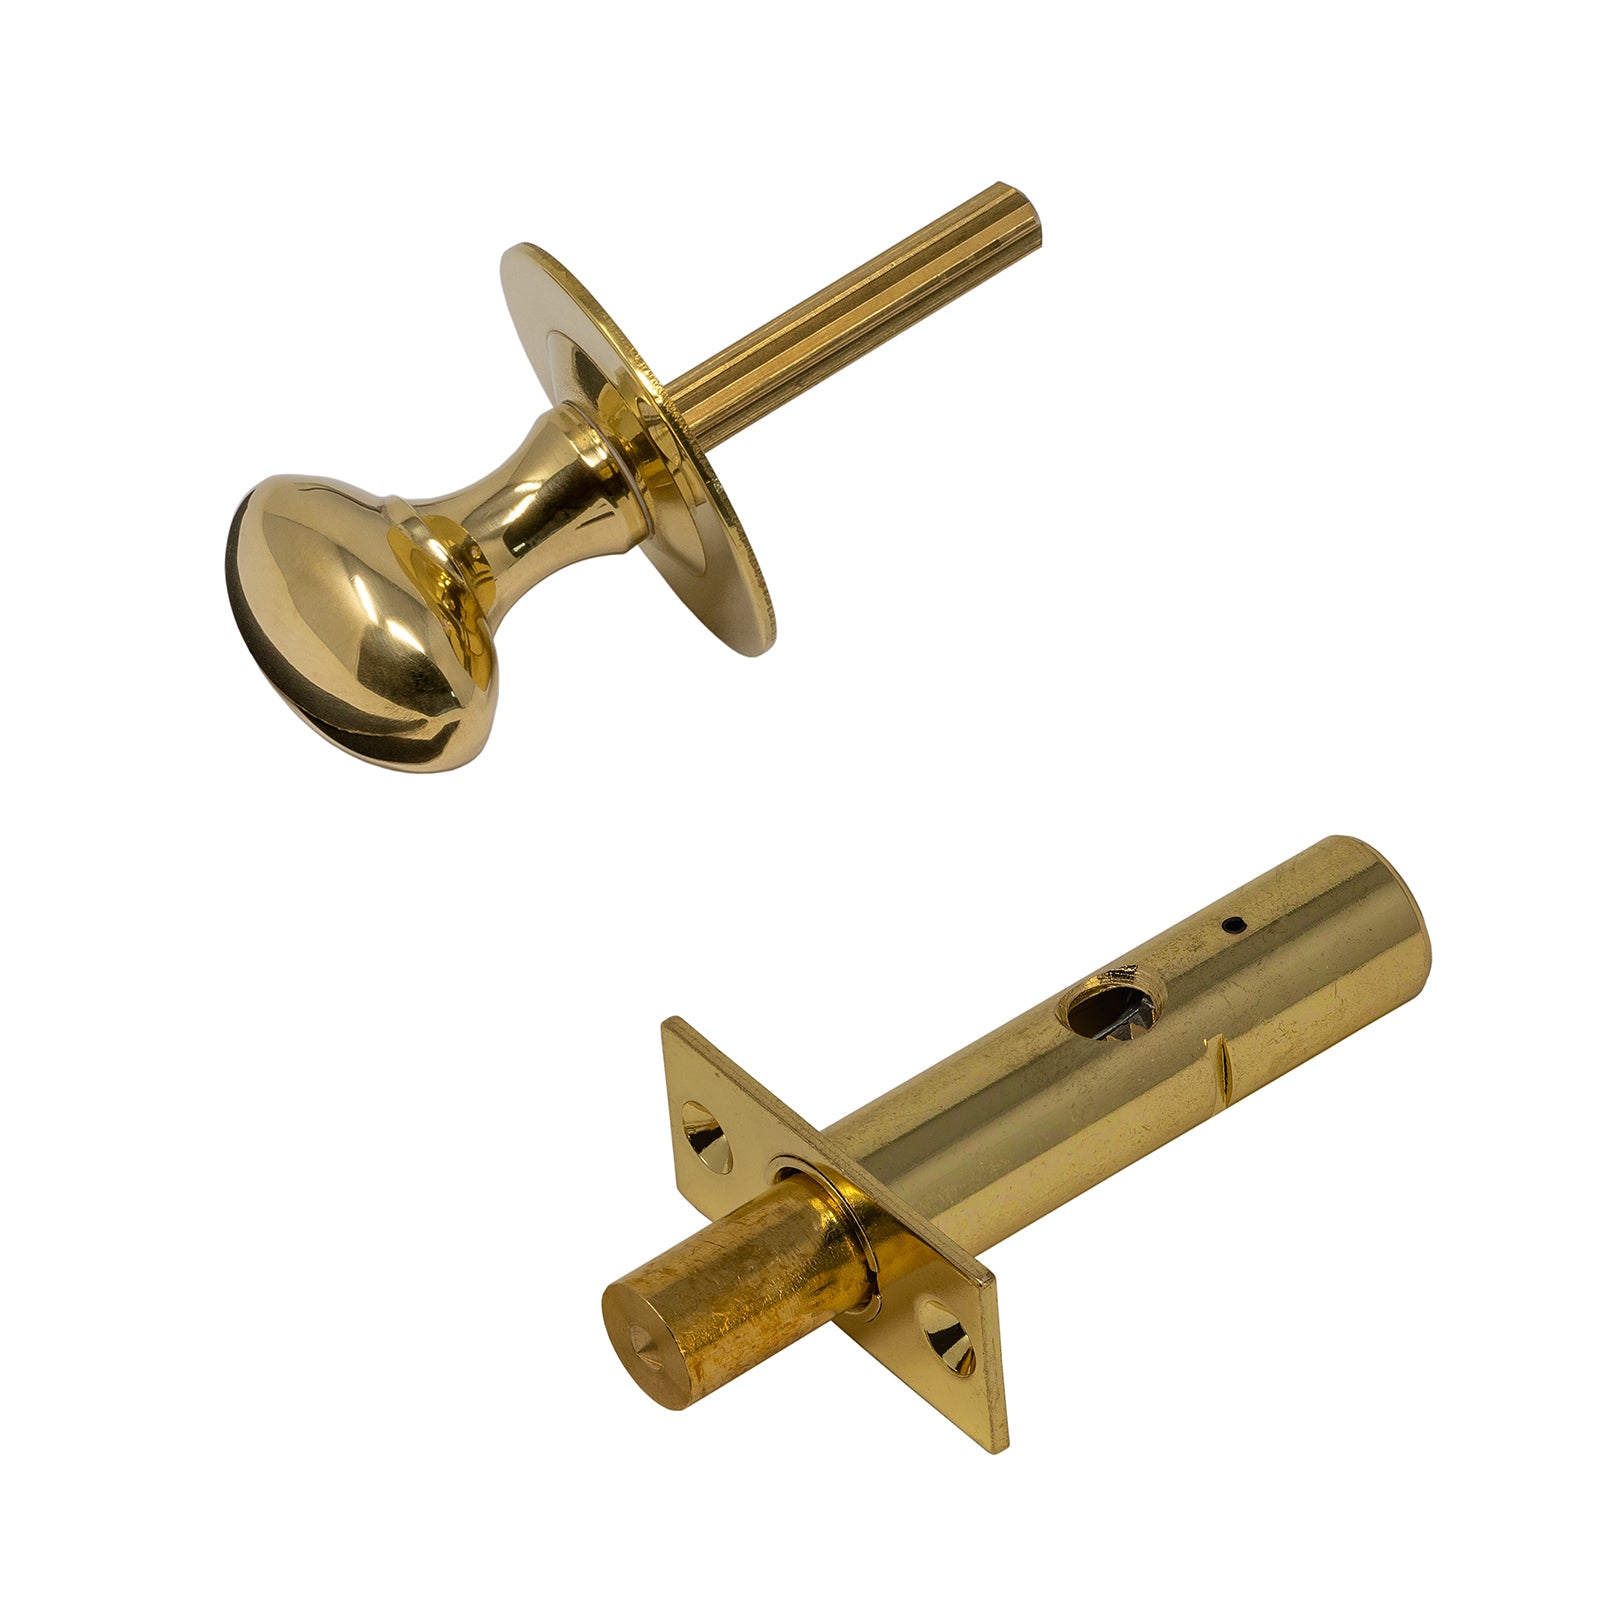 Thumb-Turn with Rack Bolt - Polished Brass House of Brass Ltd